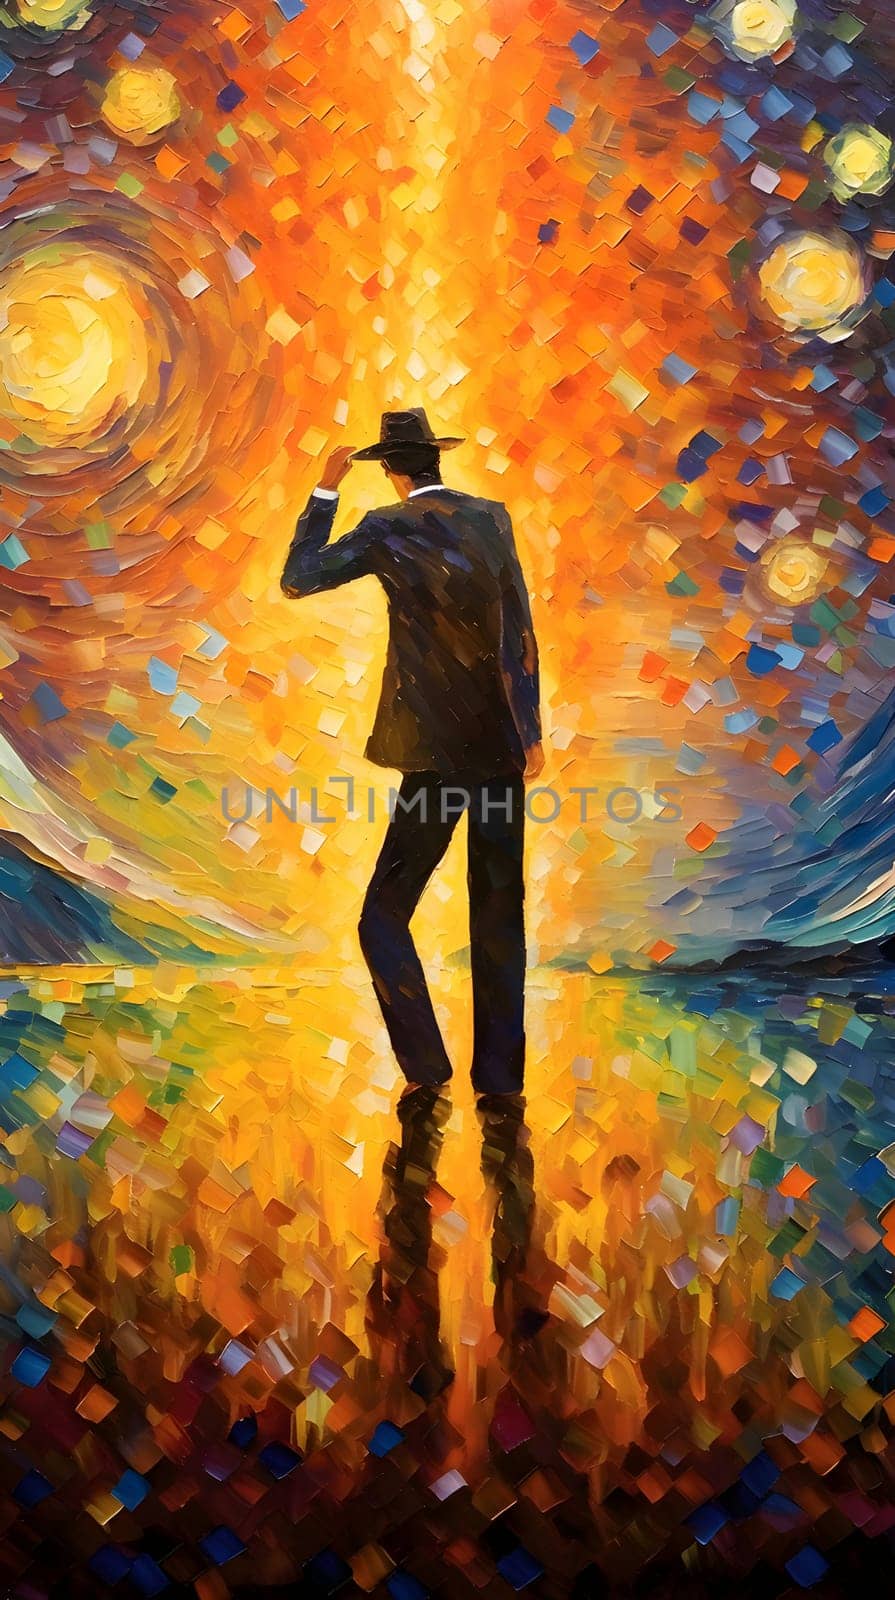 Abstract illustration: Abstract oil painting of a man in a hat and jacket on a colorful background.